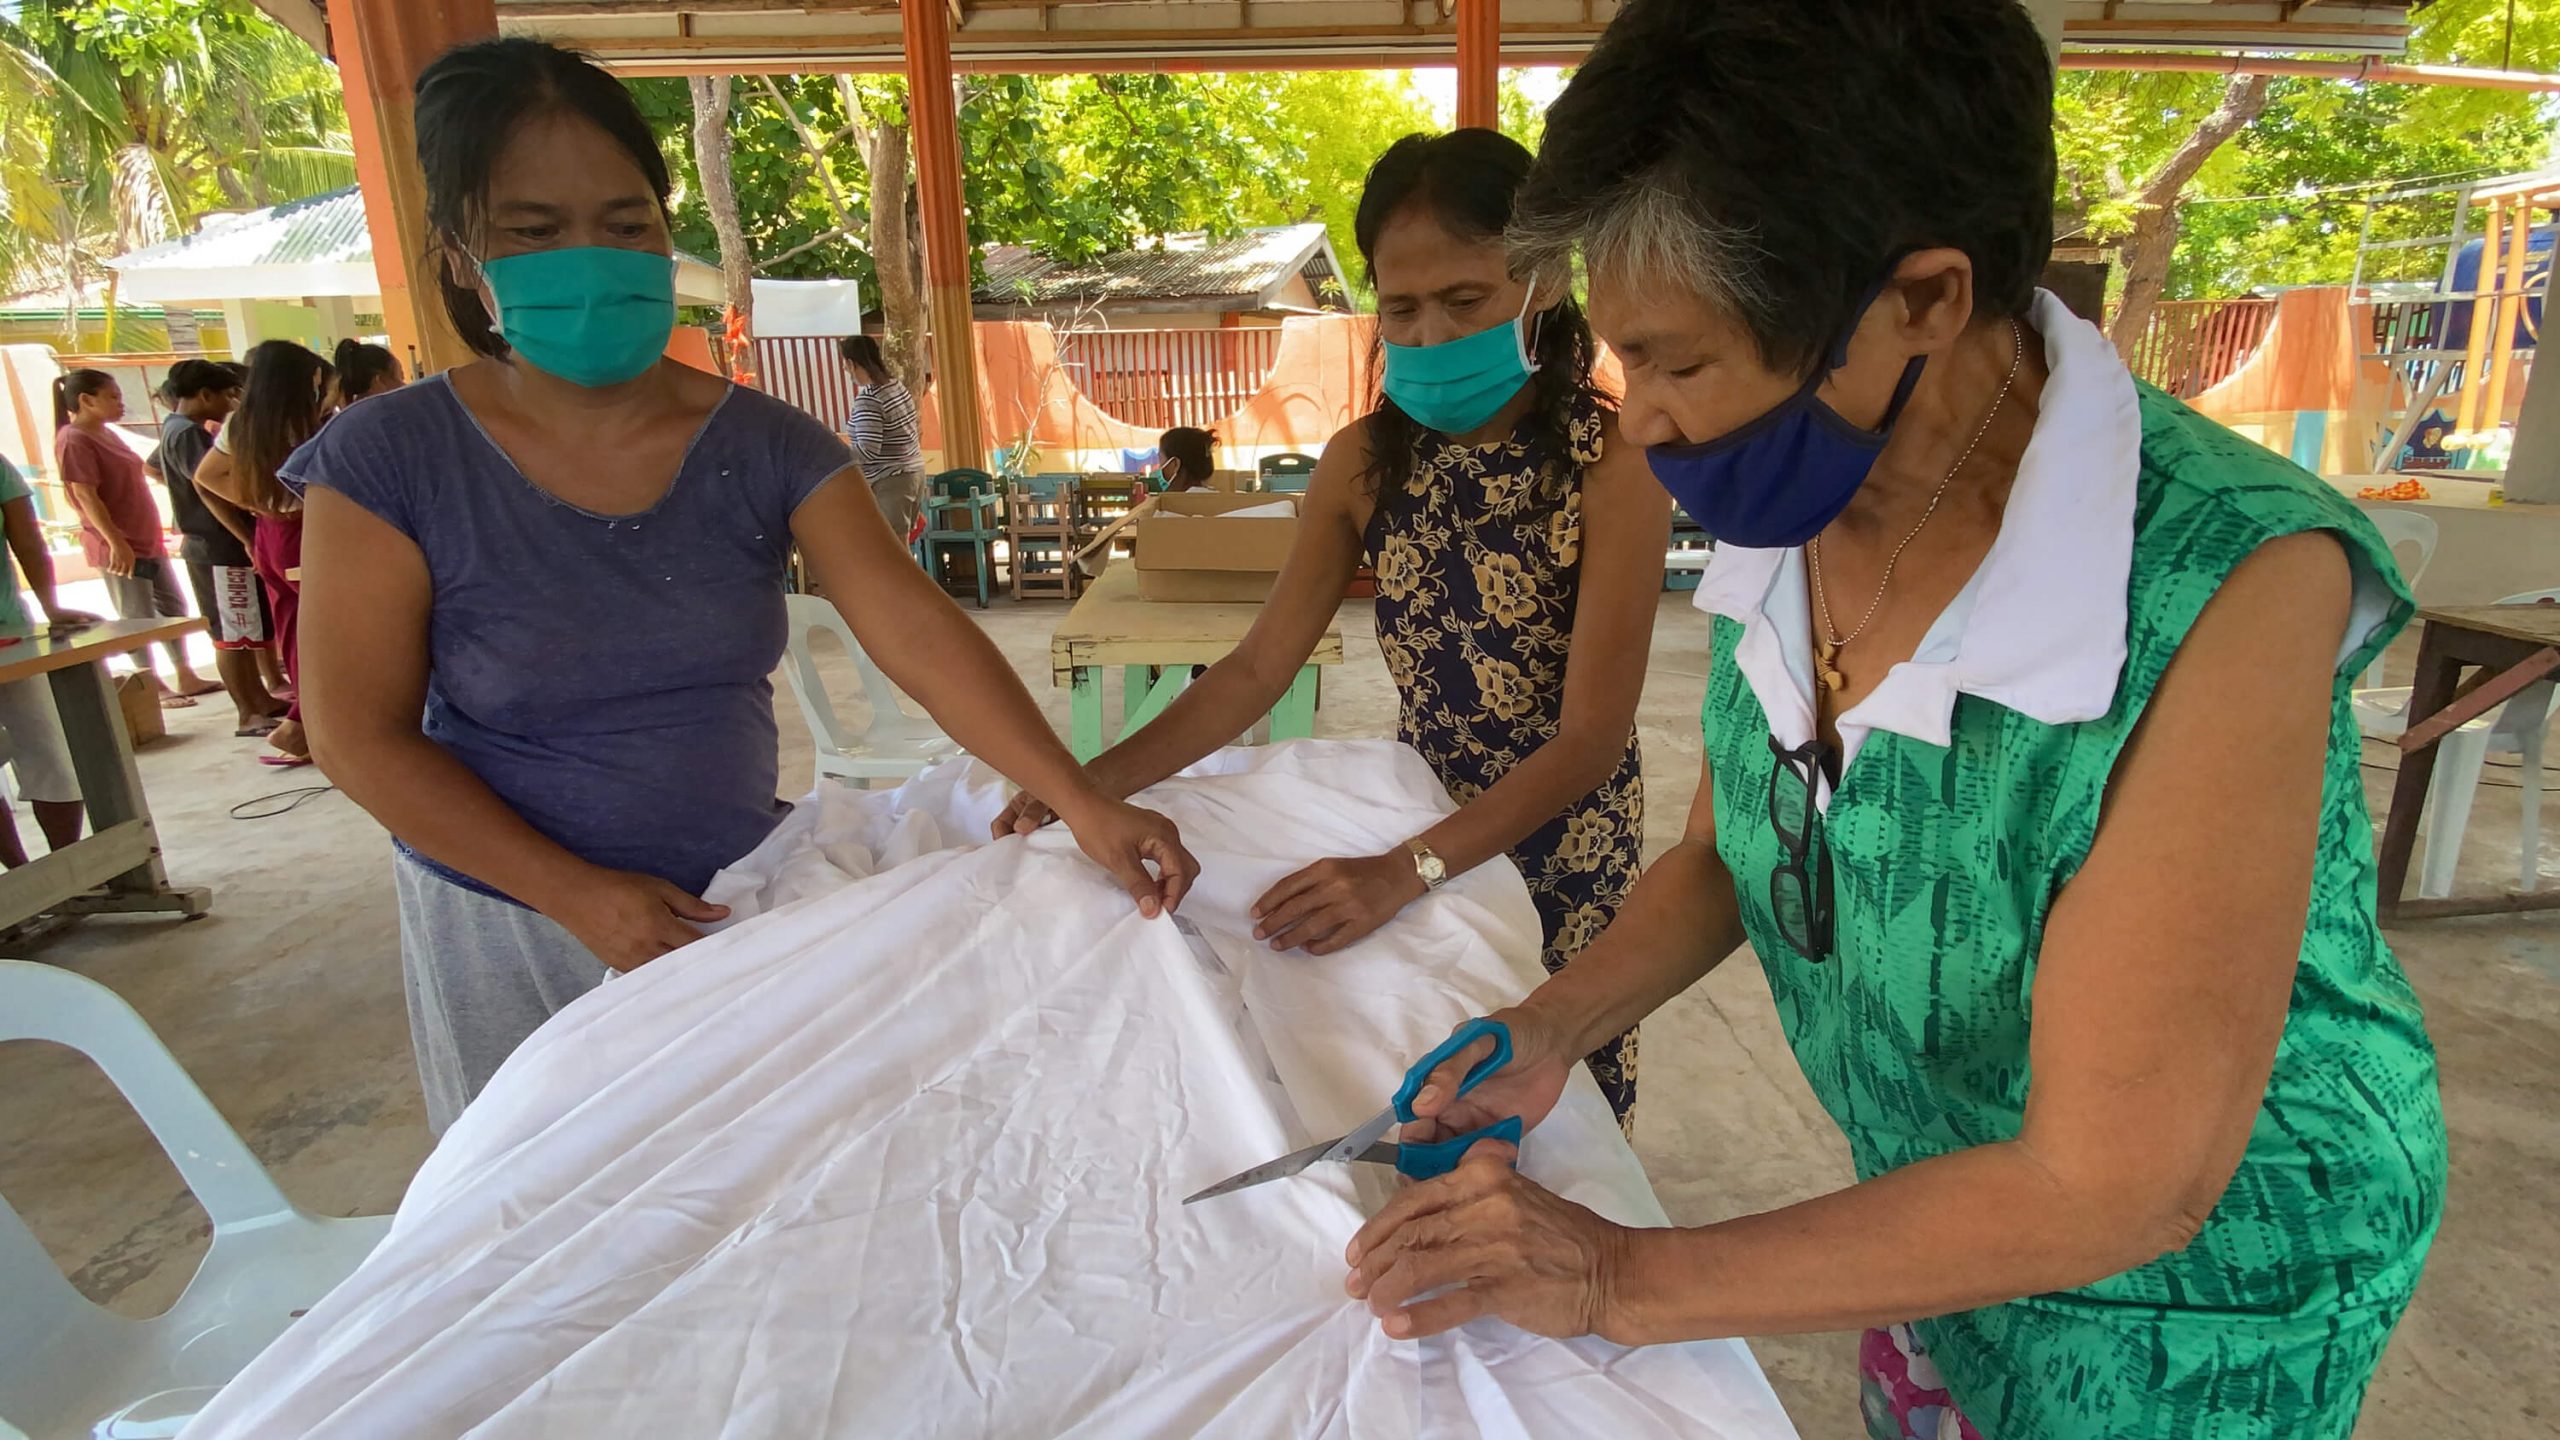 Volunteers portioning the linen to start sewing the face masks.